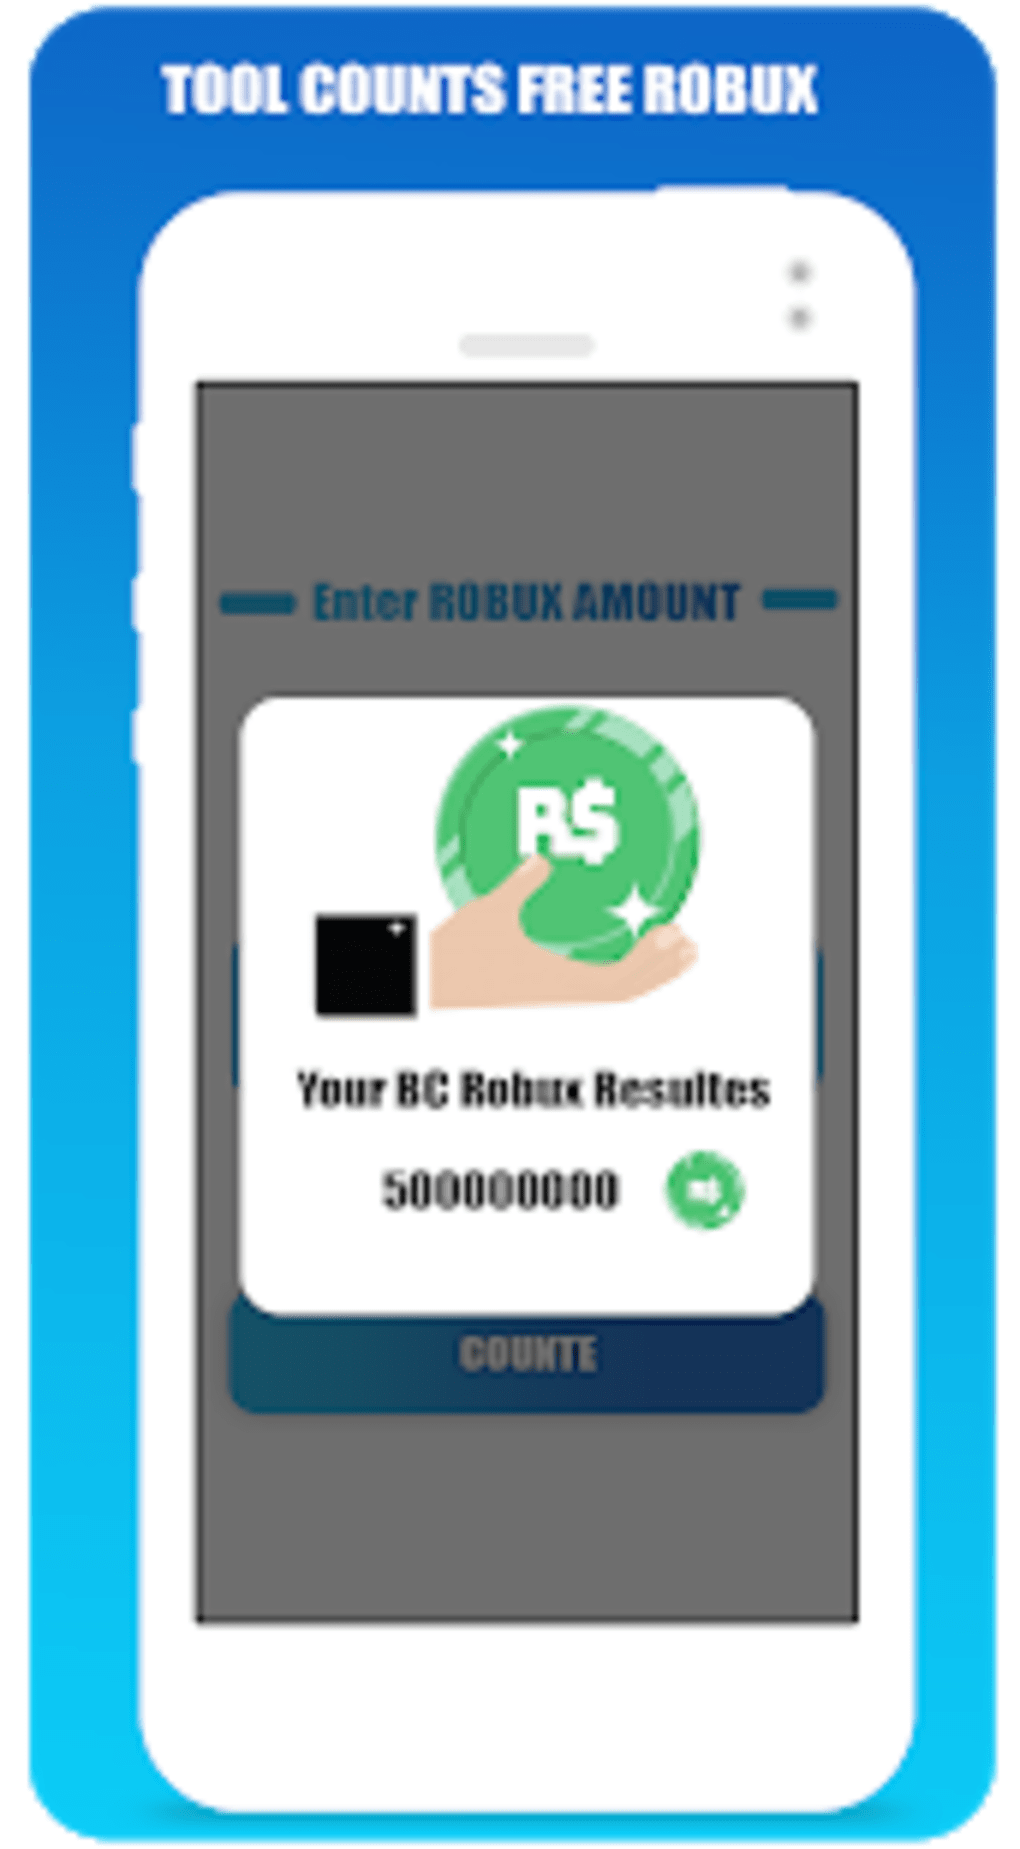 Avatar Shop for Roblox - Free Robux - Roblominer APK (Android App